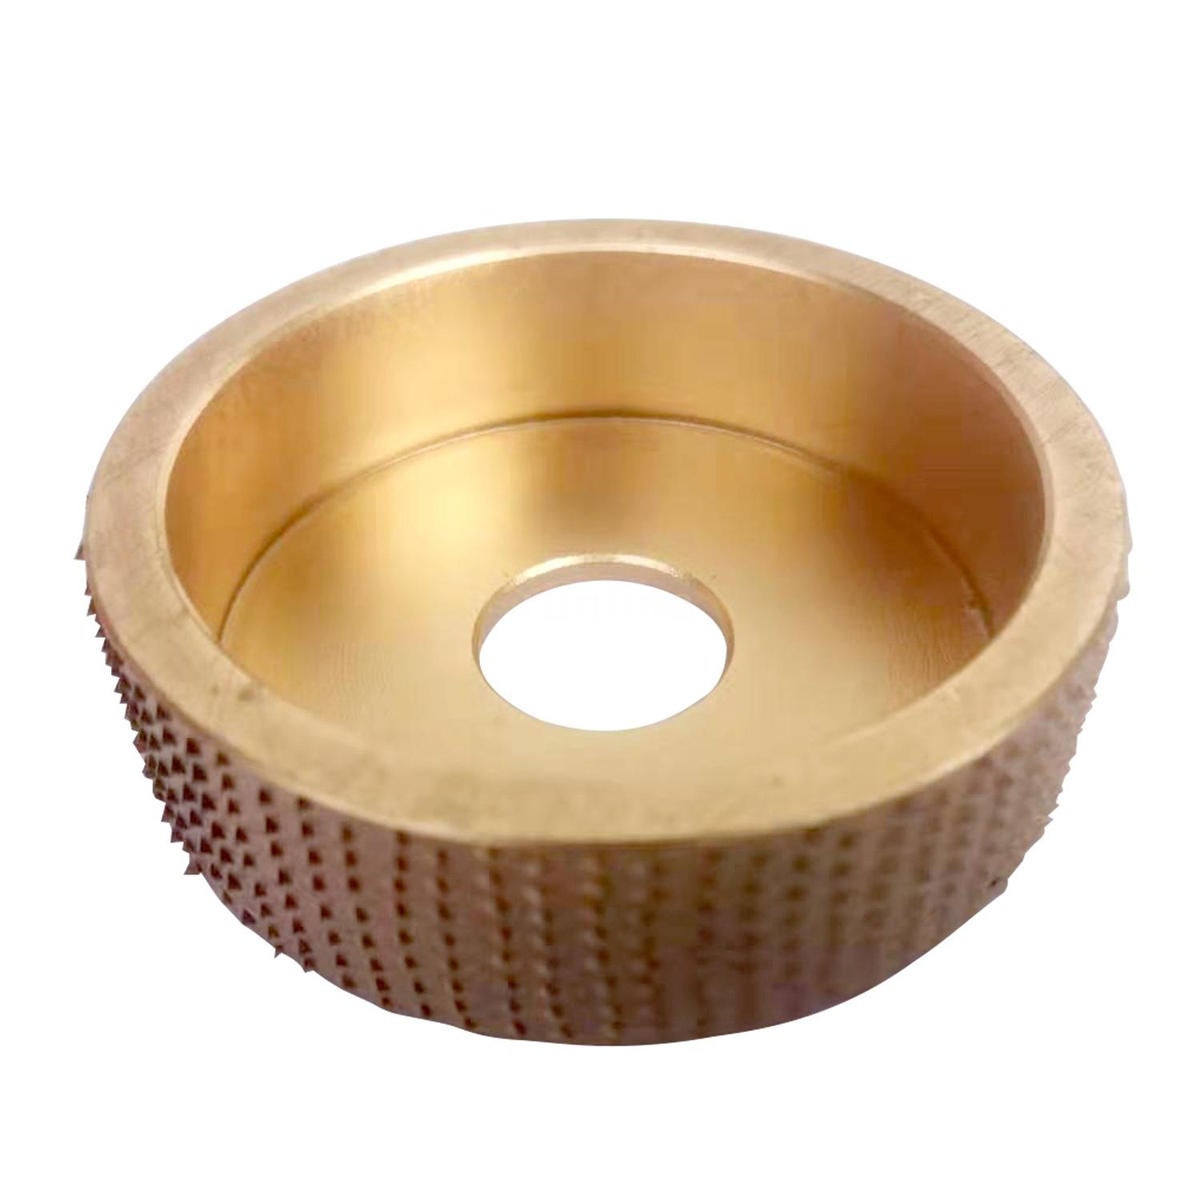 75Mm Carving Disc 16Mm Bore Steel Grinding Wheel Sanding Abrasive Rotary Tool For Angle Grinder Gold